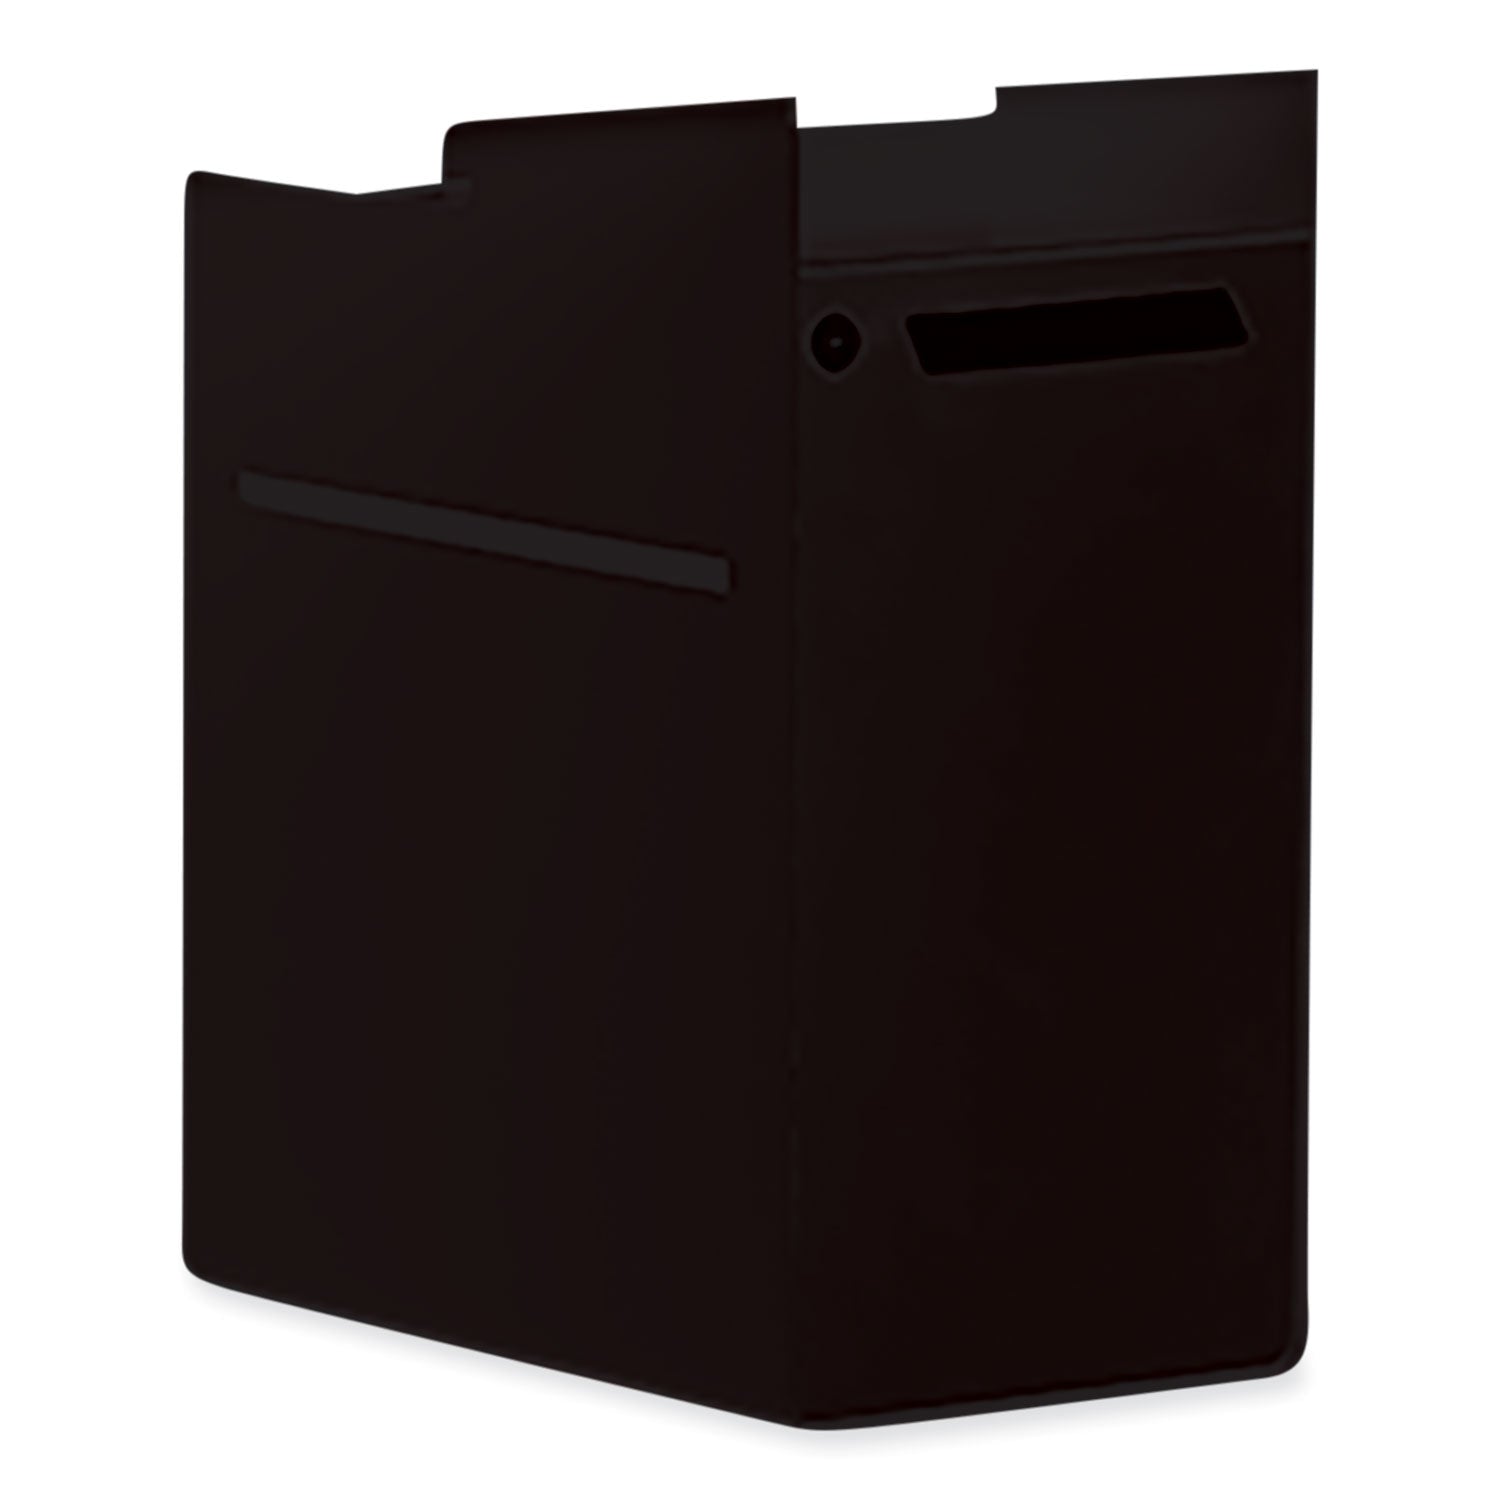 radii-console-hinged-undermount-file-cabinet-1-legal-letter-size-file-drawer-flint-10-x-15-x-16_aszaufh15n001 - 1